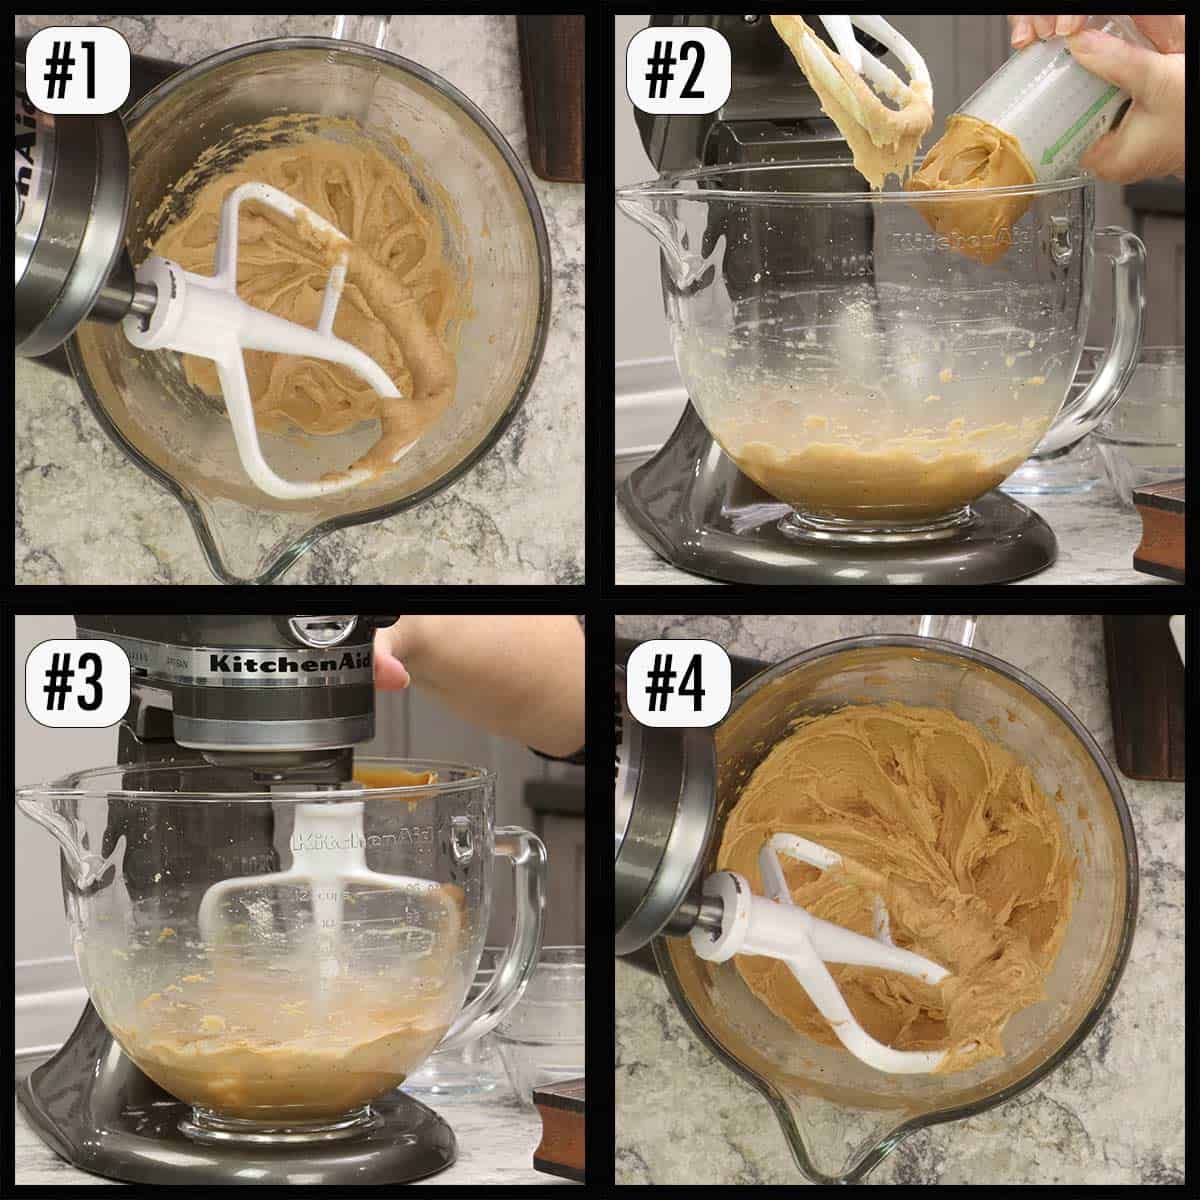 adding the peanut butter to the cookie batter.